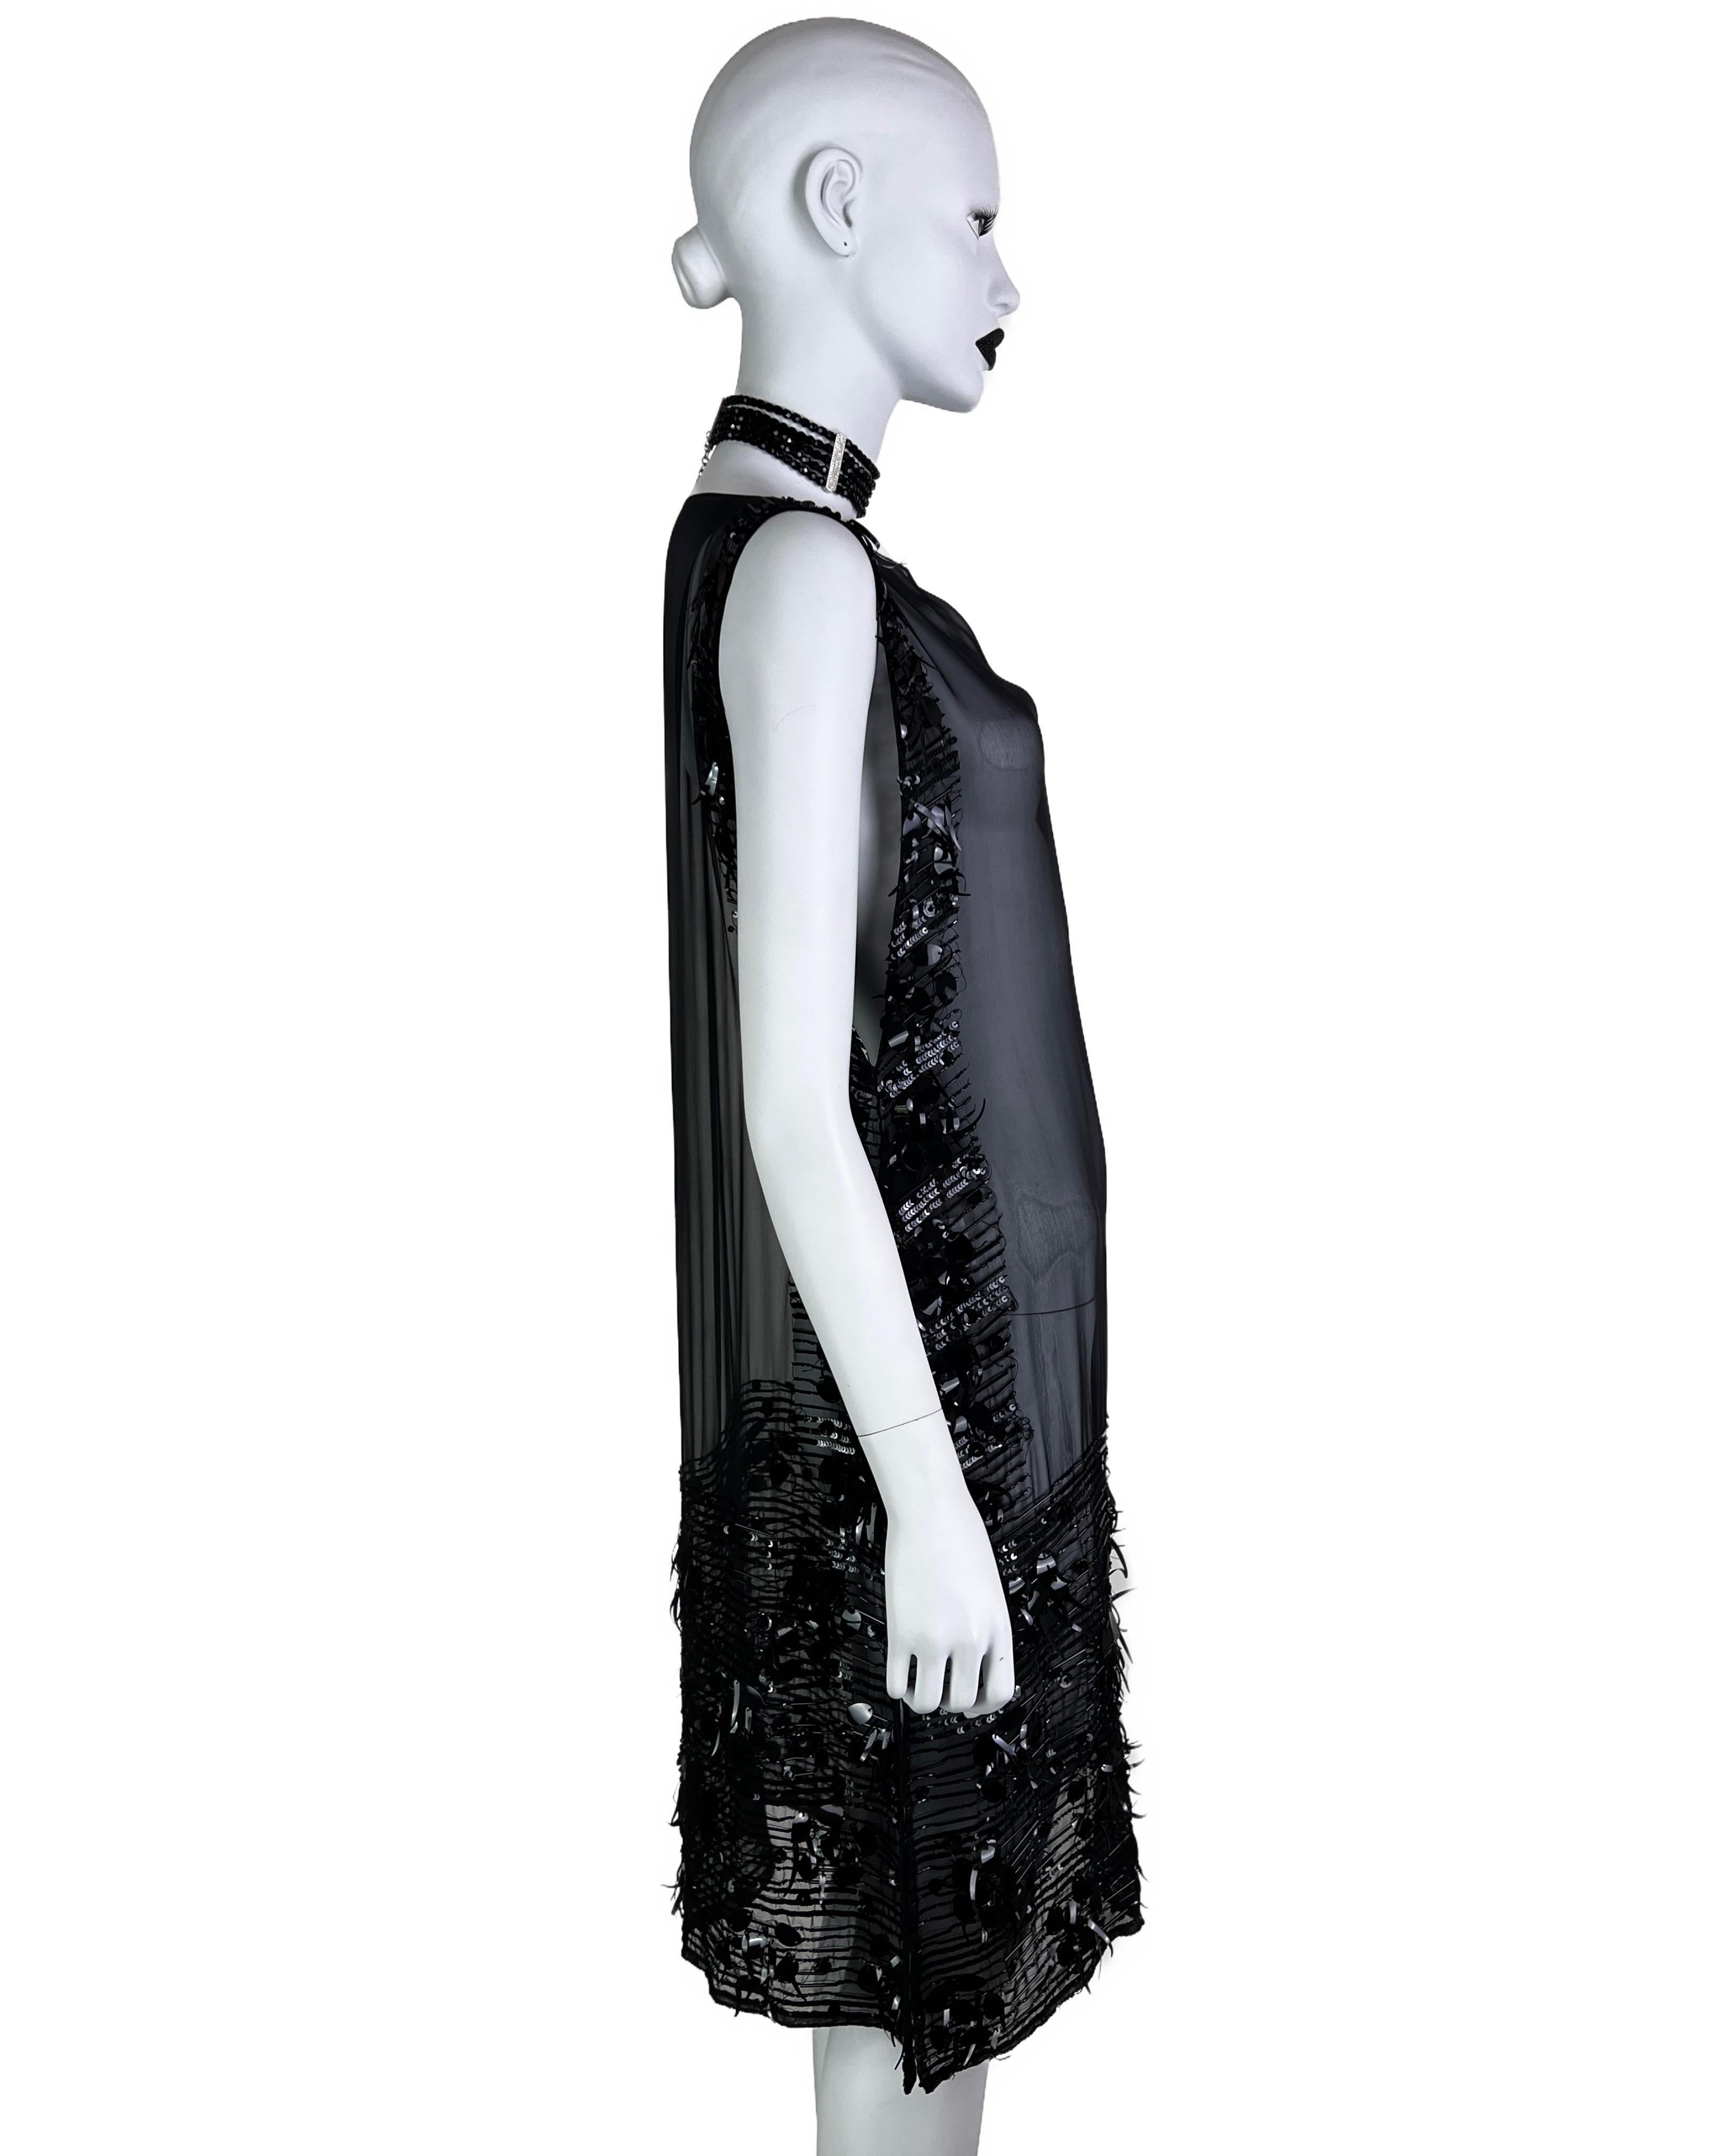 Jean-Paul Gaultier Fall 2004 Embellished Black Silk Chiffon Tunic Dress In Good Condition For Sale In Prague, CZ